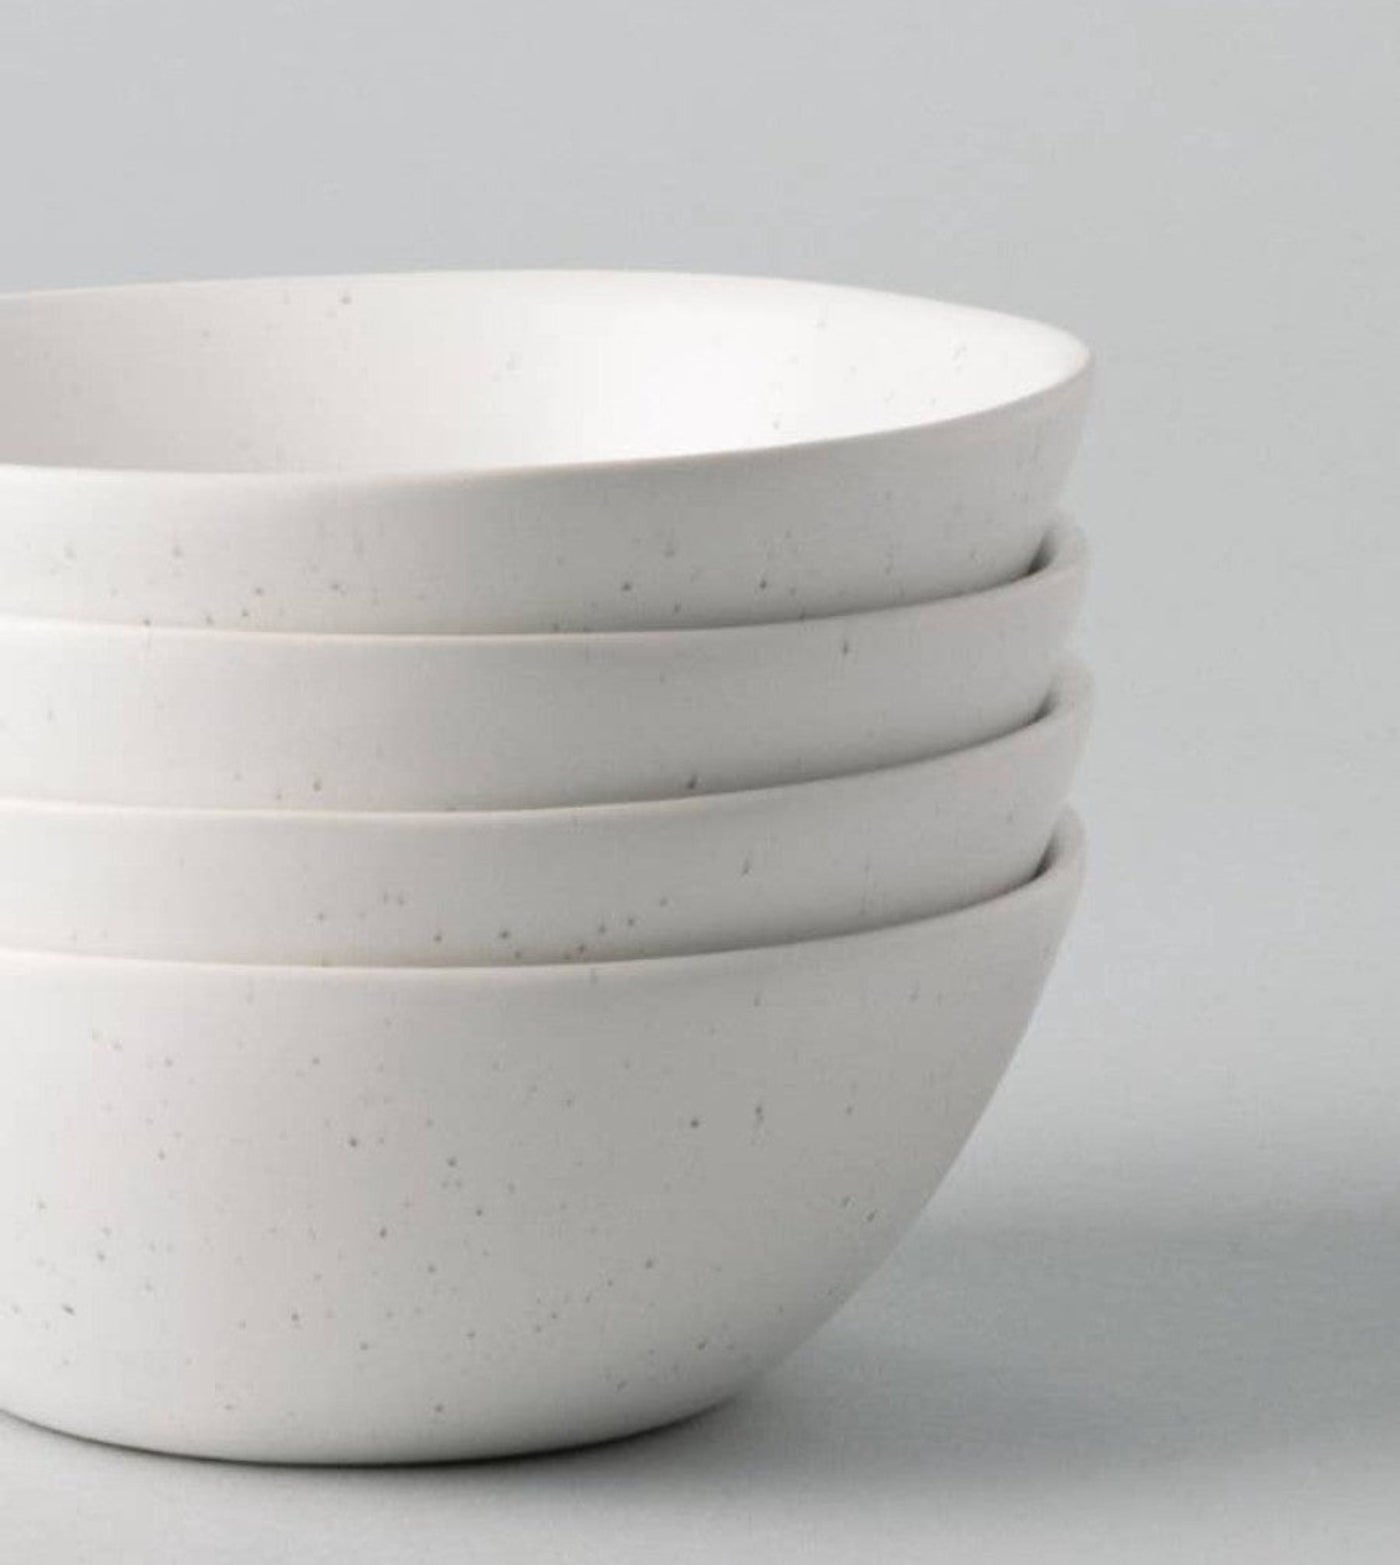 Fable Breakfast Bowls -Stoneware dinnerware designed in Vancouver Canada, hand-finished in Portugal